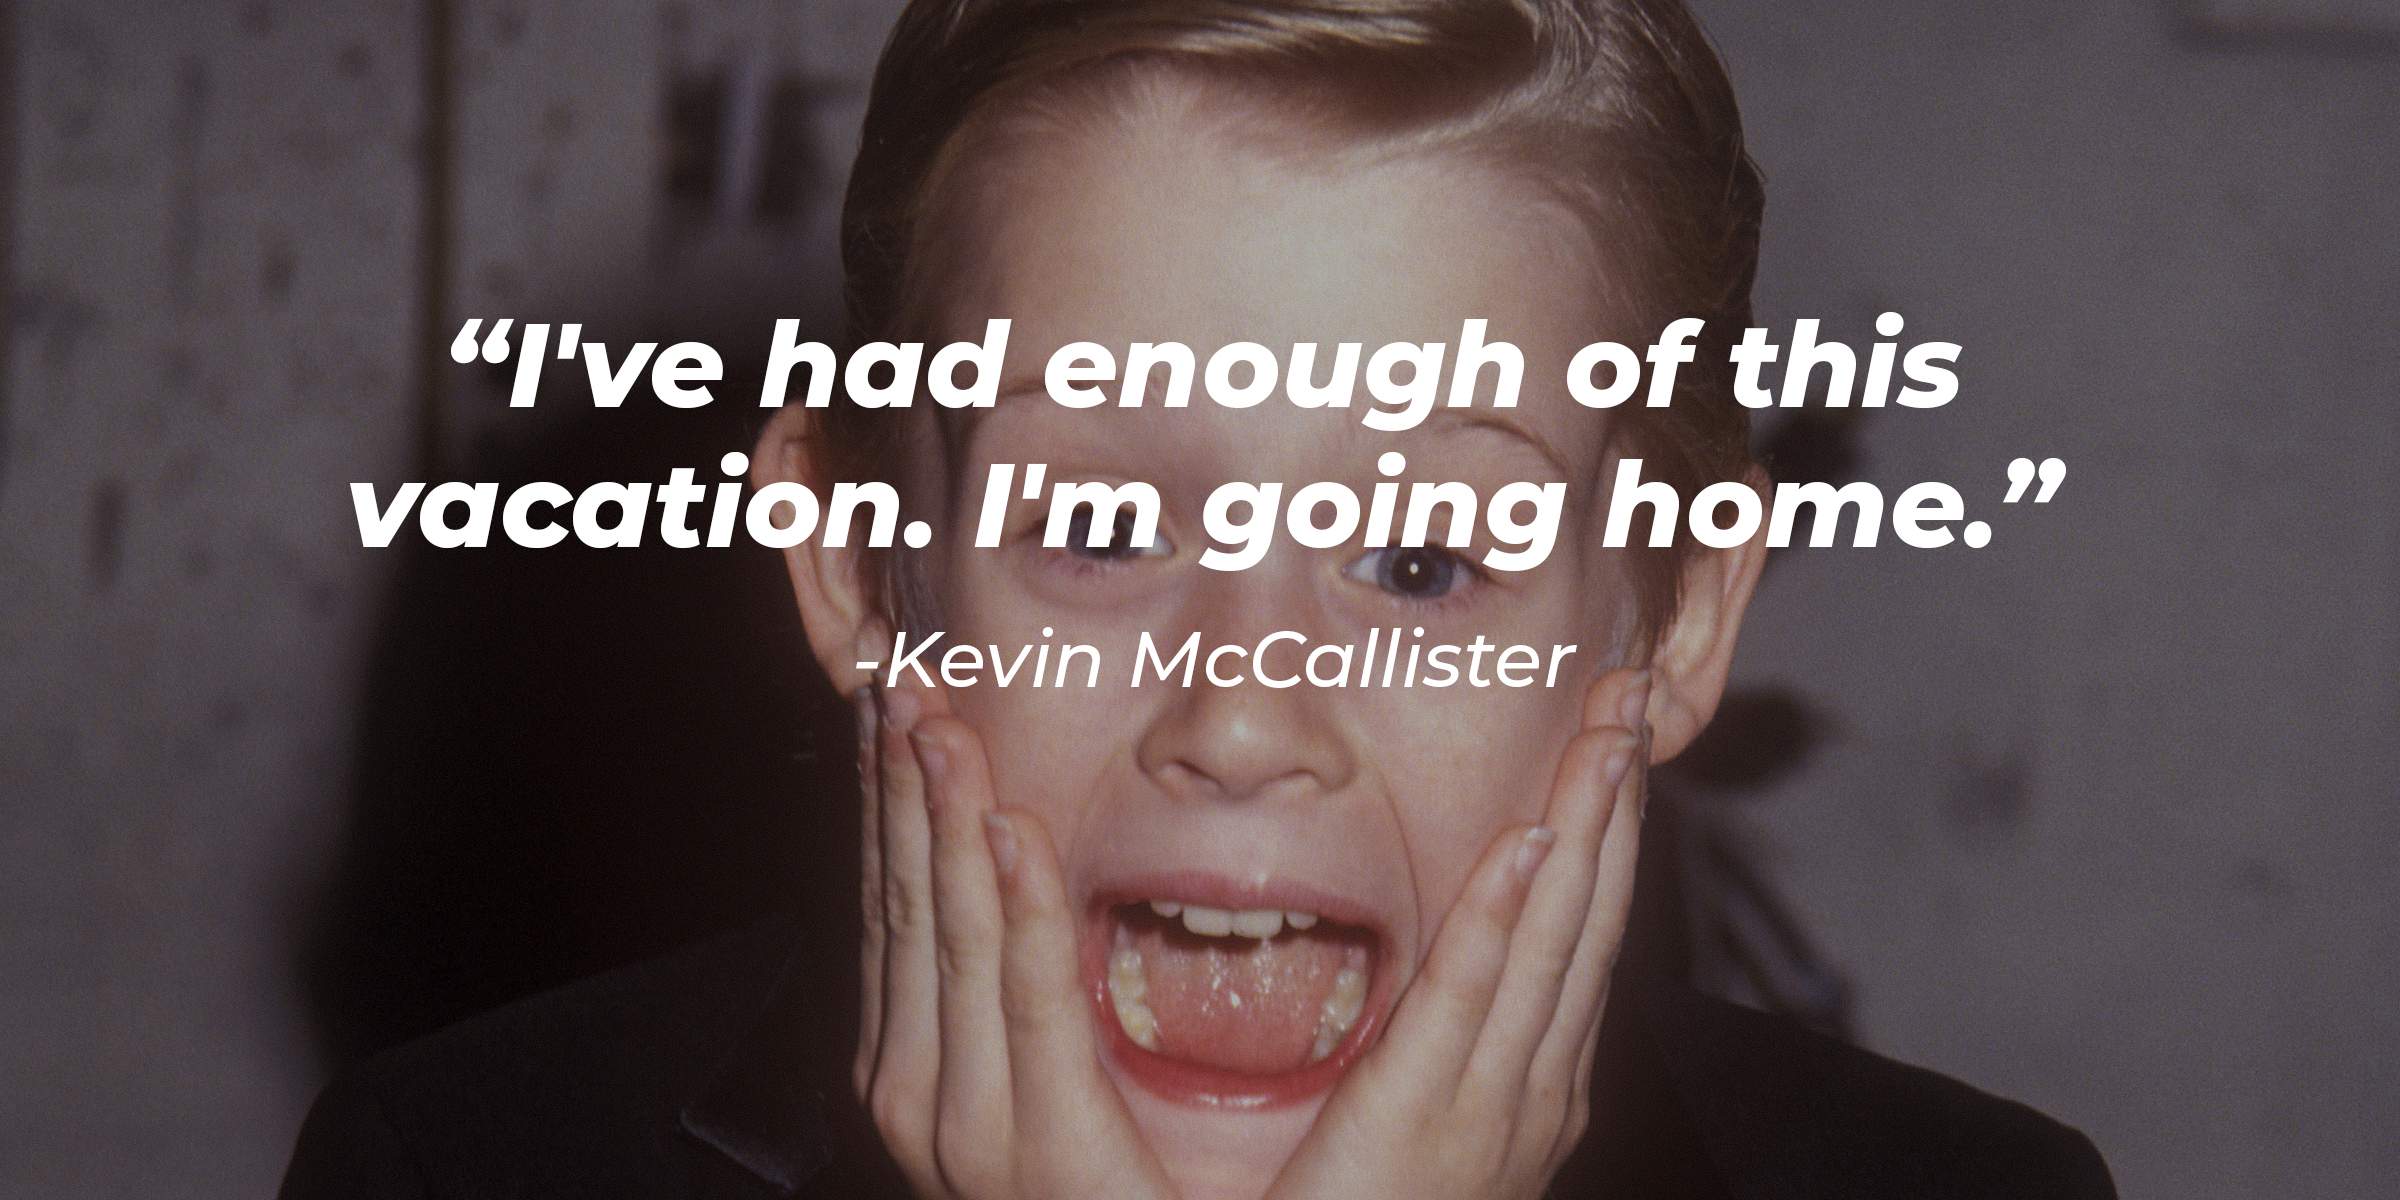 A photo of Kevin McCallister from "Home Alone 2" with the quote: "I've had enough of this vacation. I'm going home." | Source: Getty Images